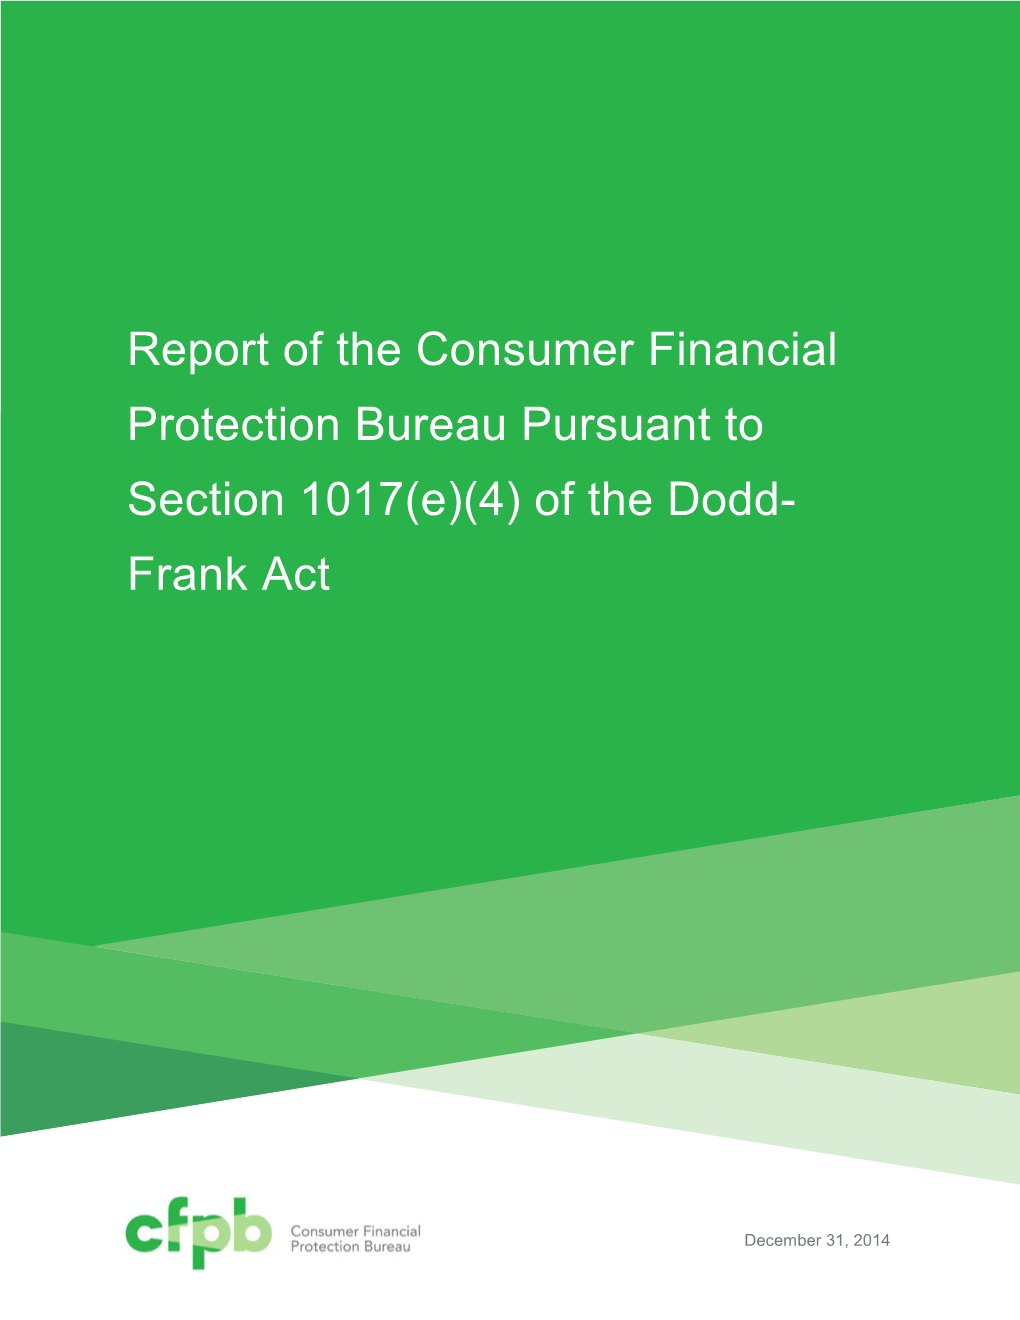 Report of the CFPB Pursuant to Section 1017(E)(4) of the Dodd